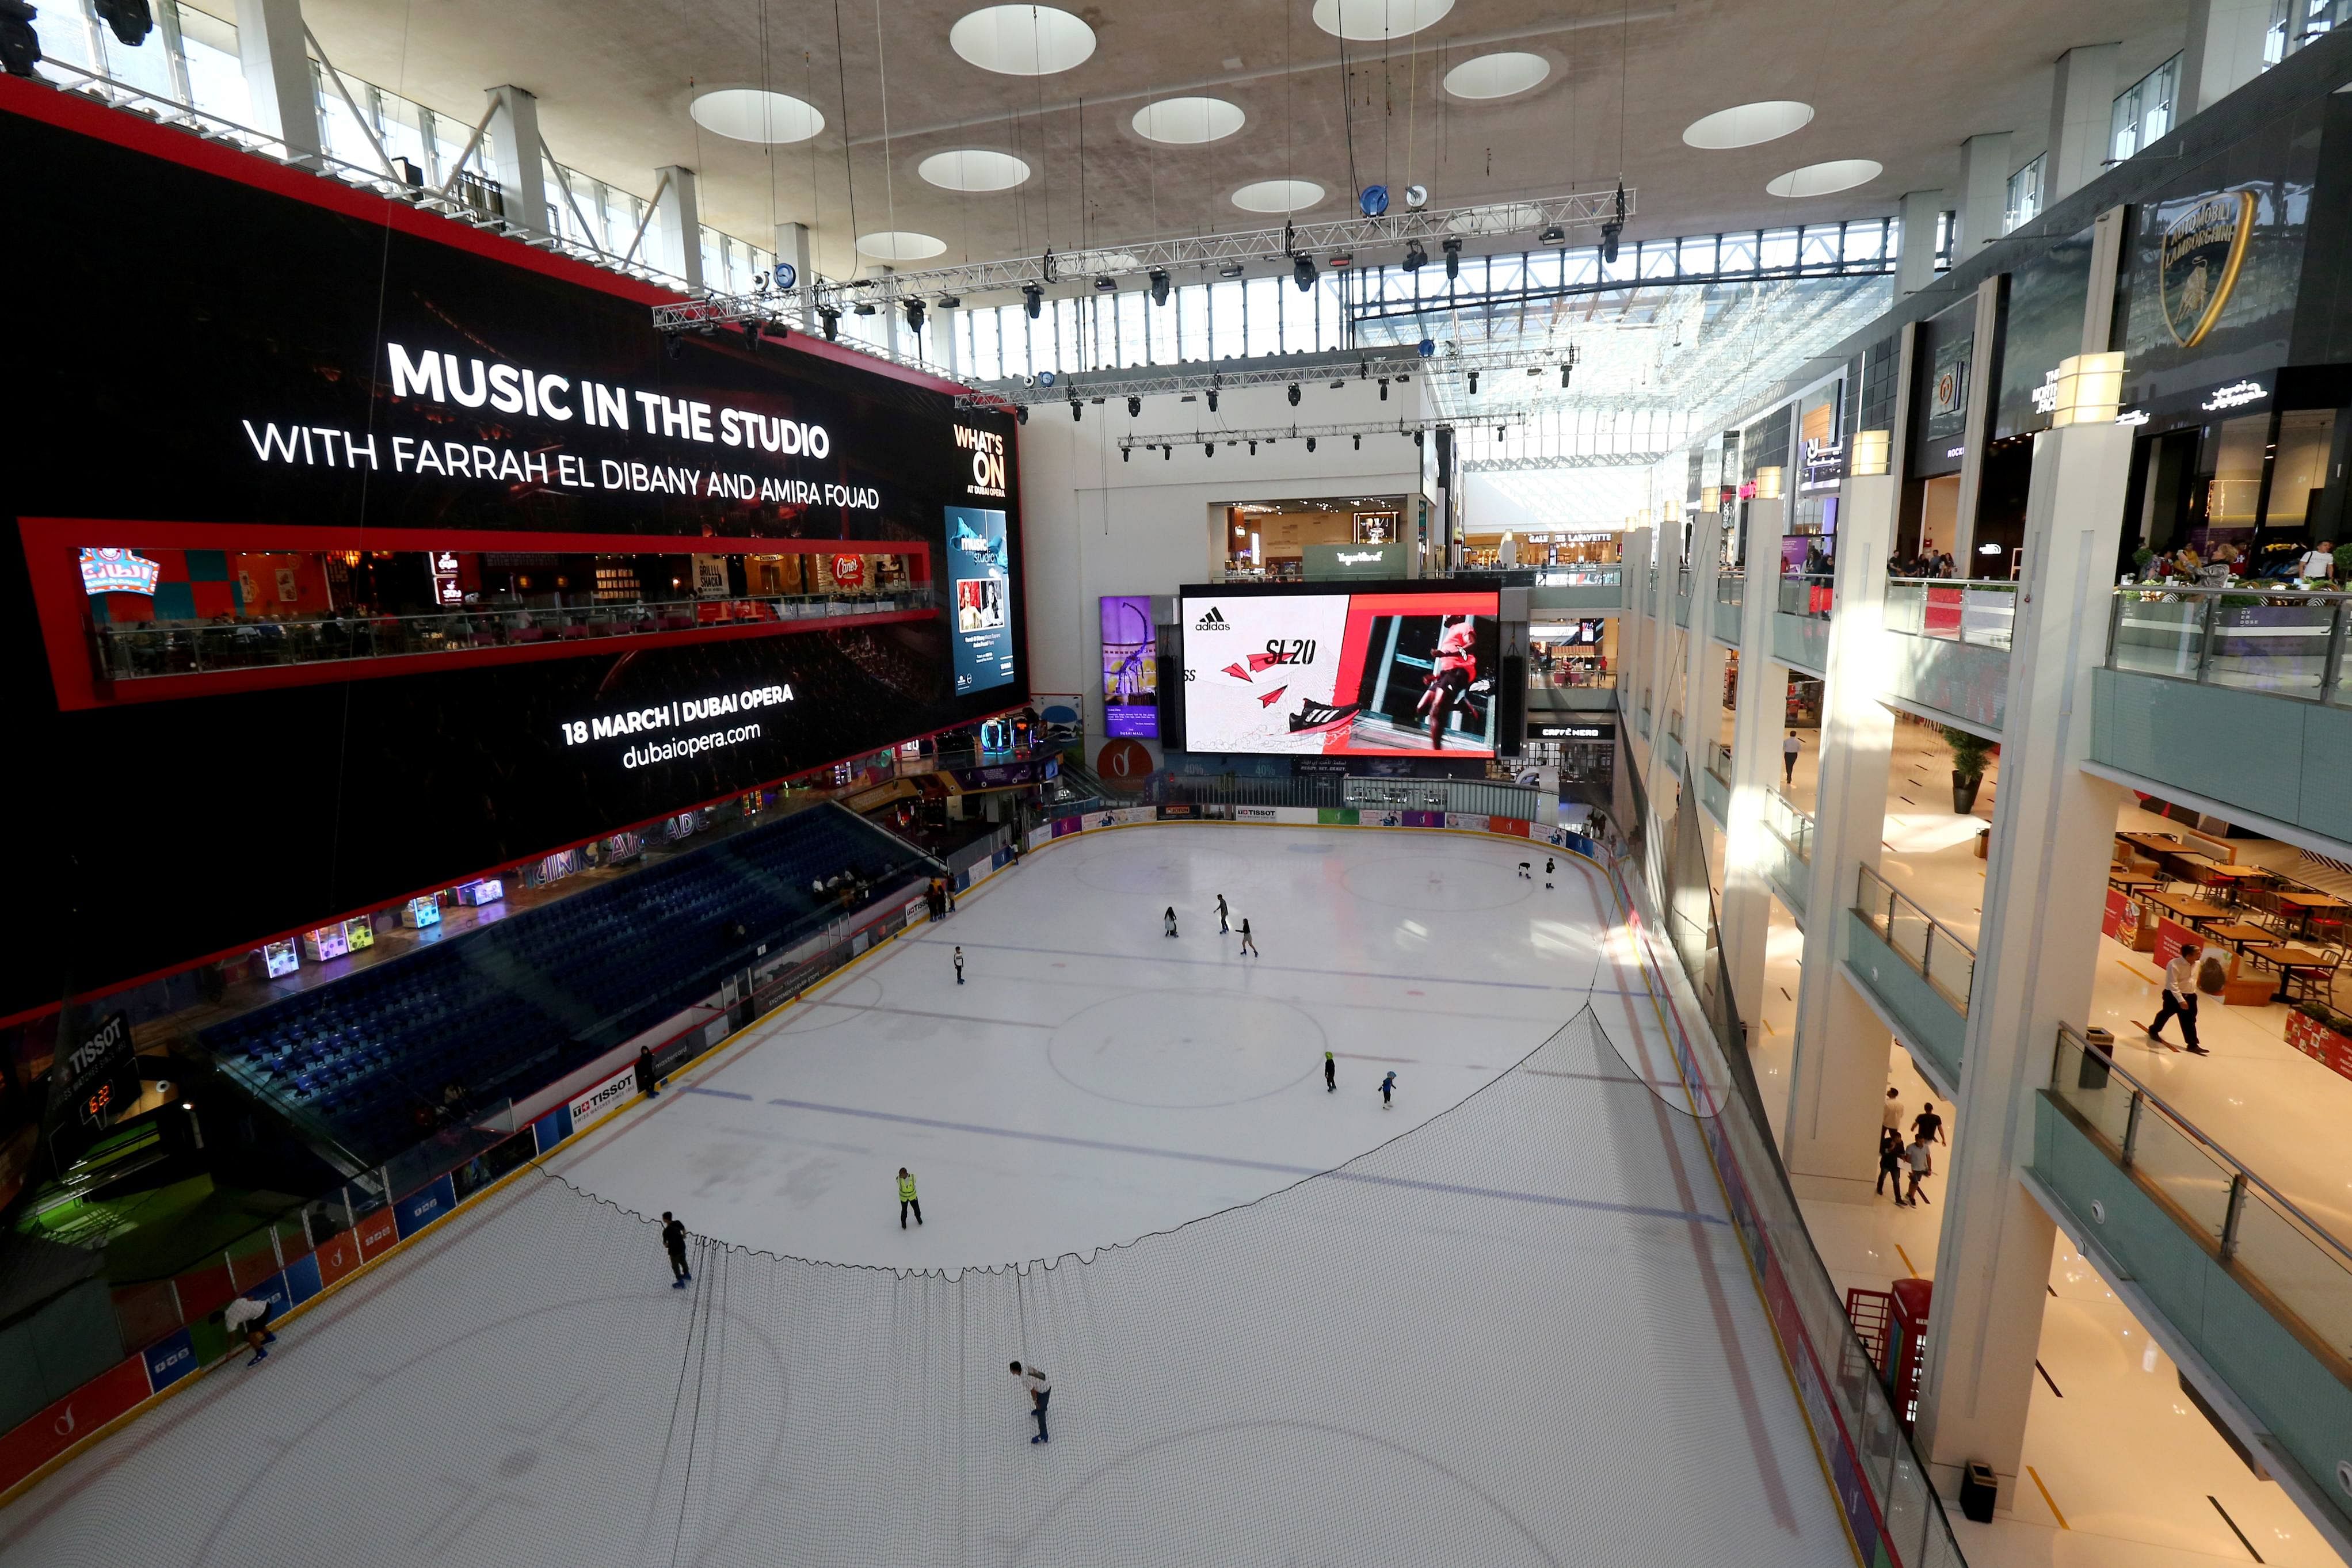 The ice rink is seen in a mall in Dubai. (Credit: Reuters)